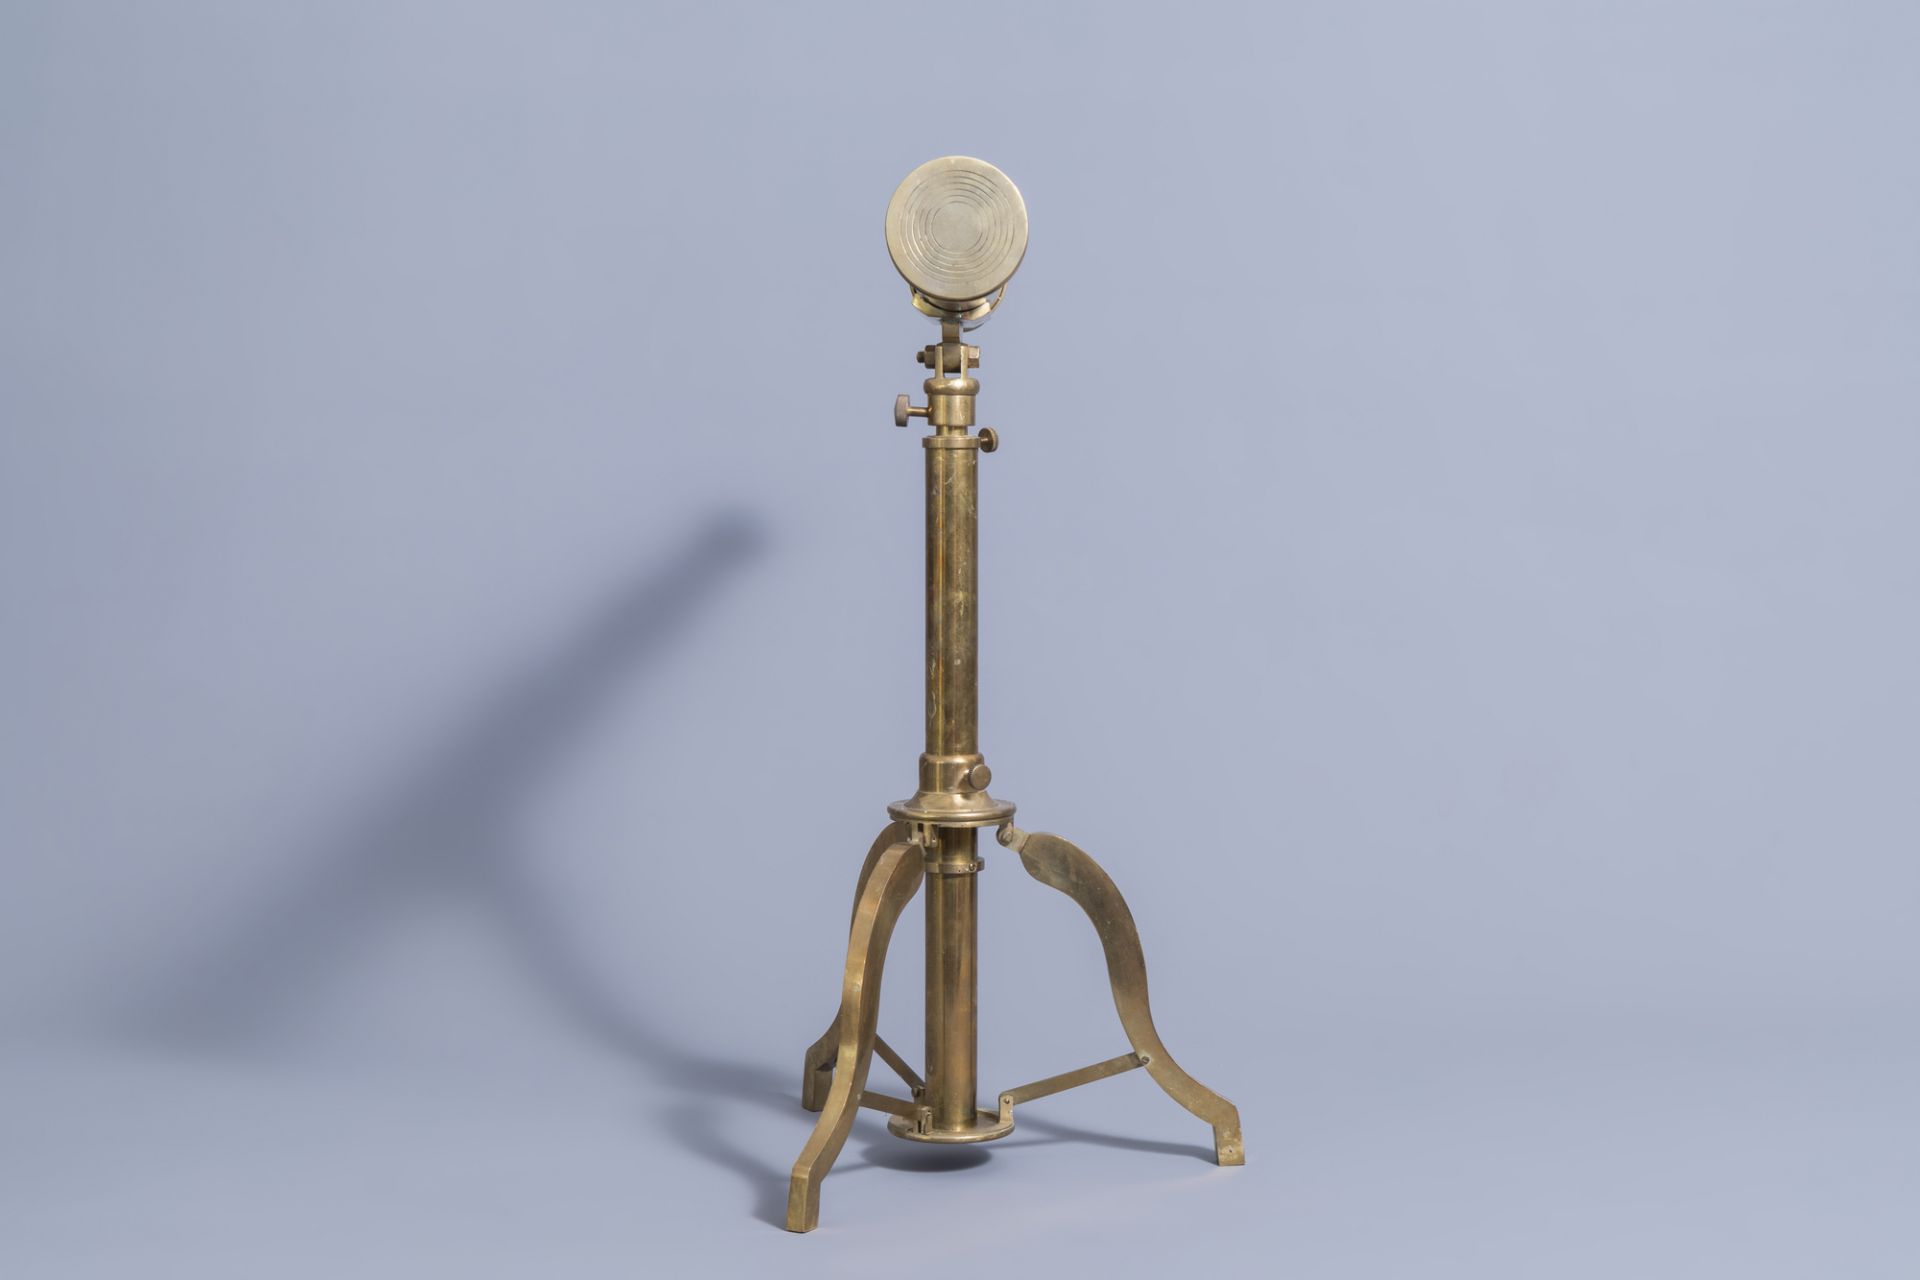 An English Stanley London brass telescope on a tripod stand, 20th C. - Image 6 of 8